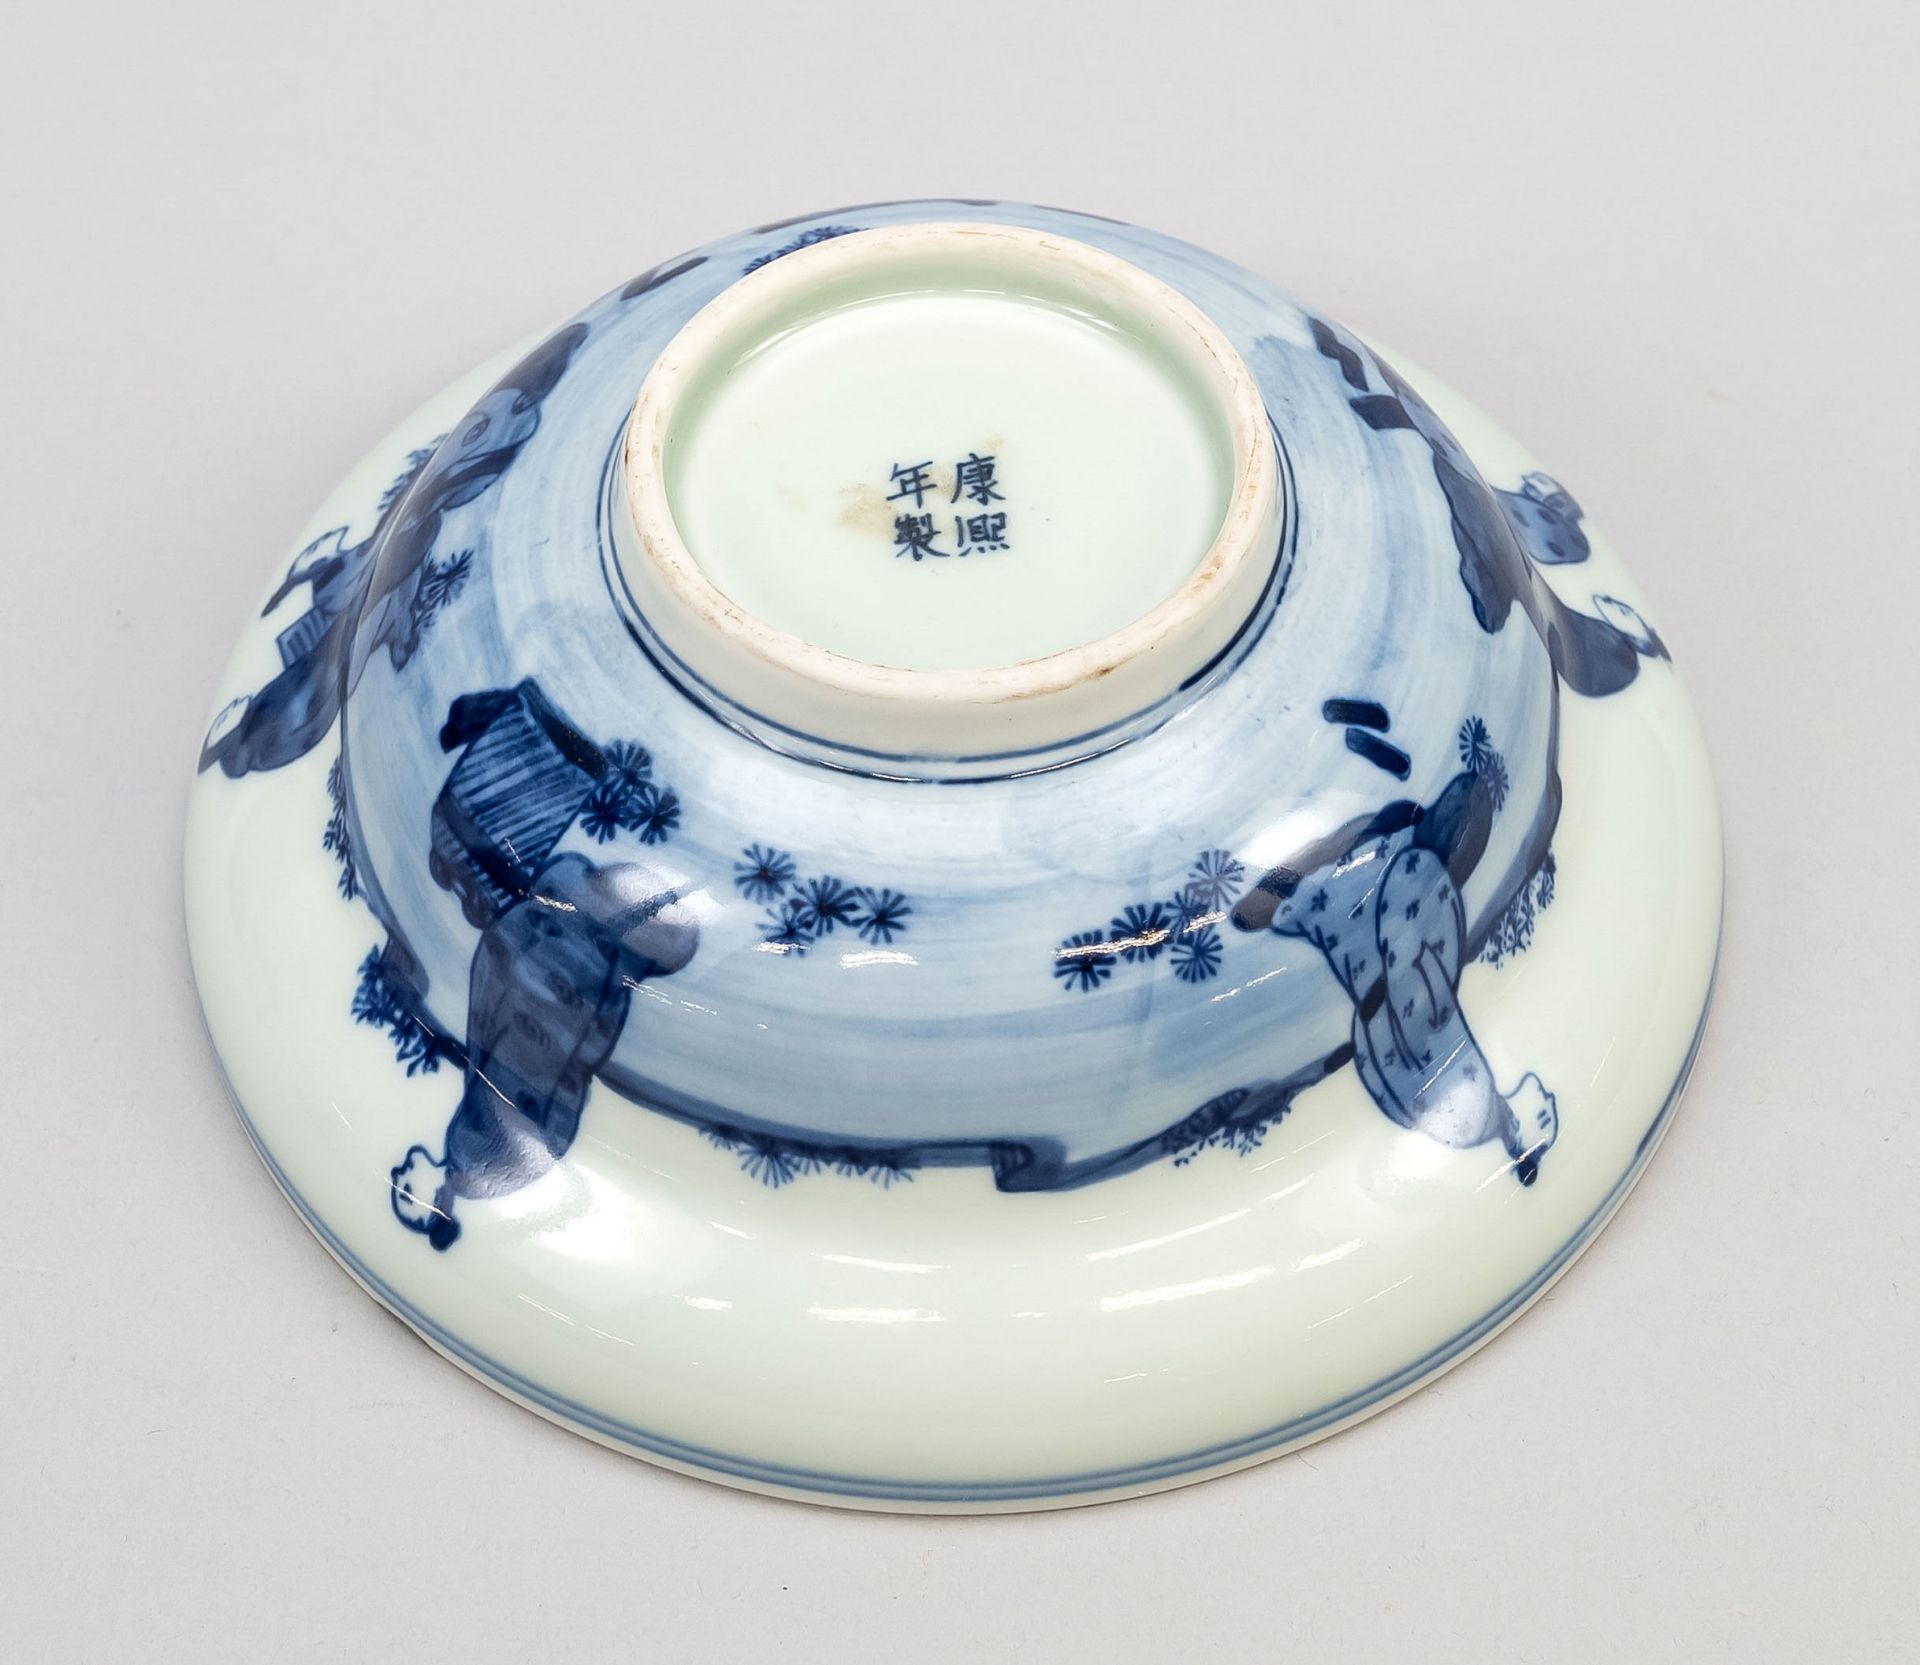 Lion bowl, probably Qing dynasty(1644-1911) Yongzheng period(1723-1735), blue and white porcelain - Image 2 of 2